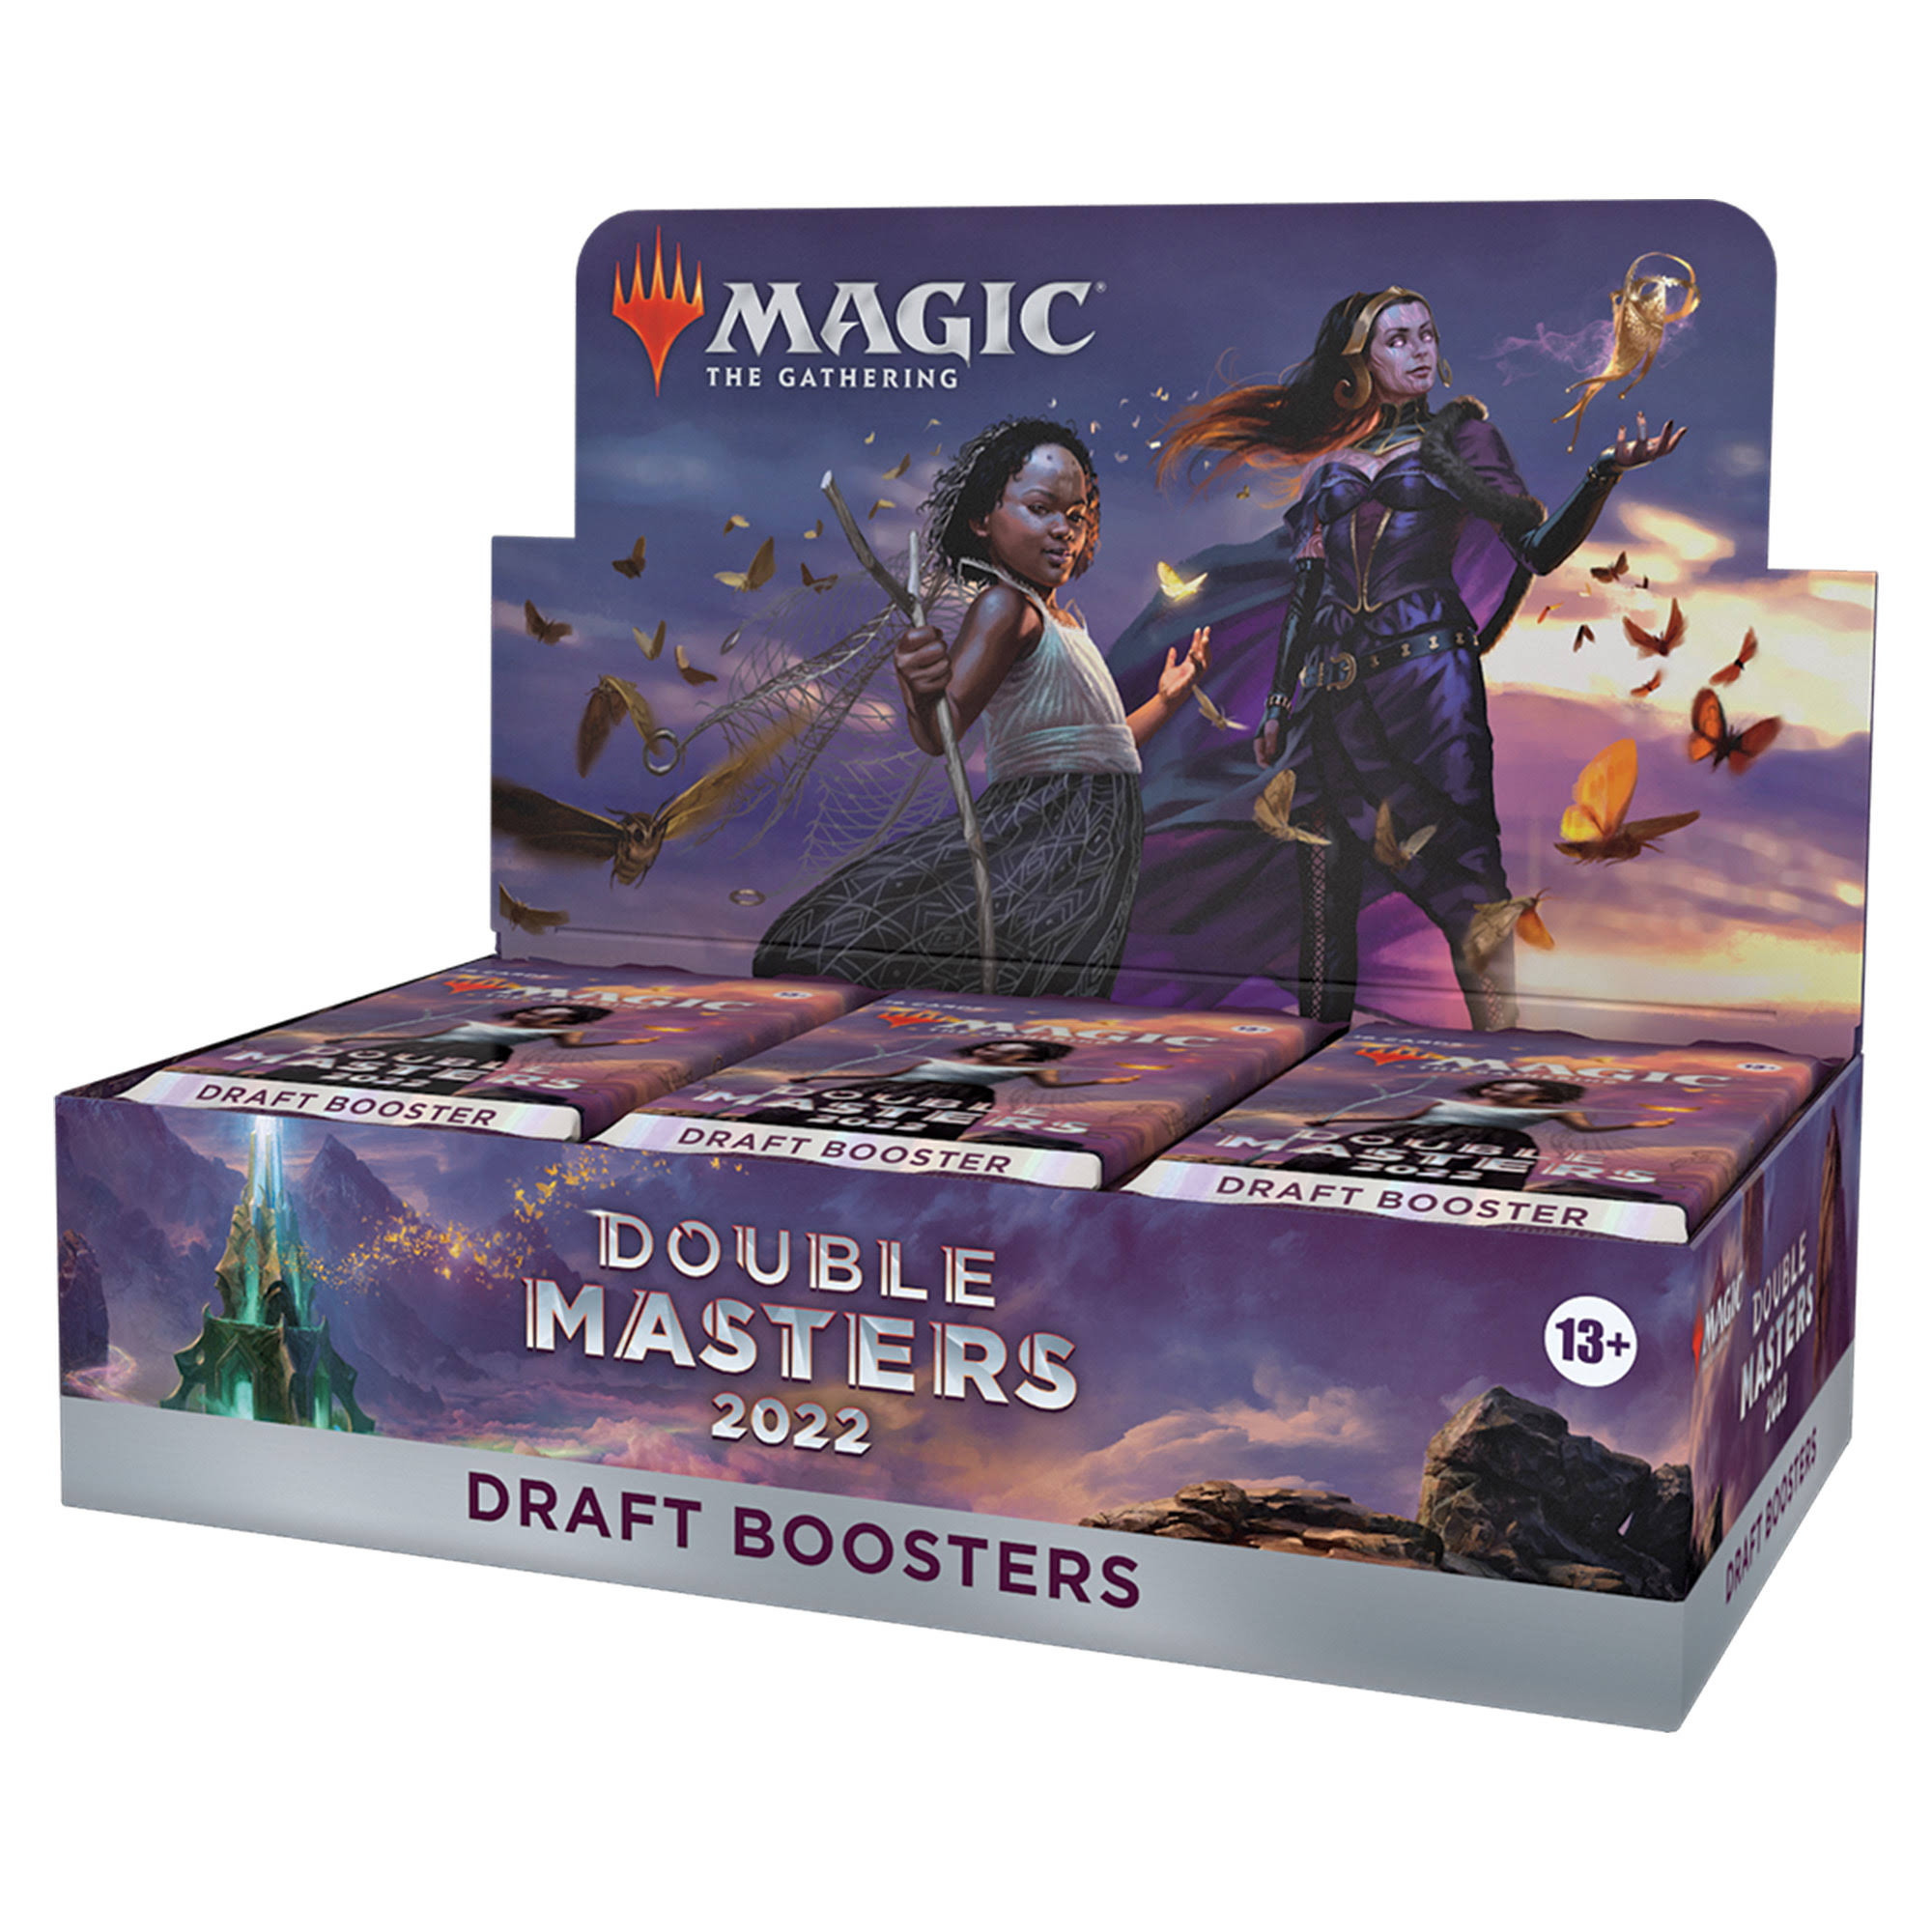 Double Masters 2022 Draft Booster Display Box